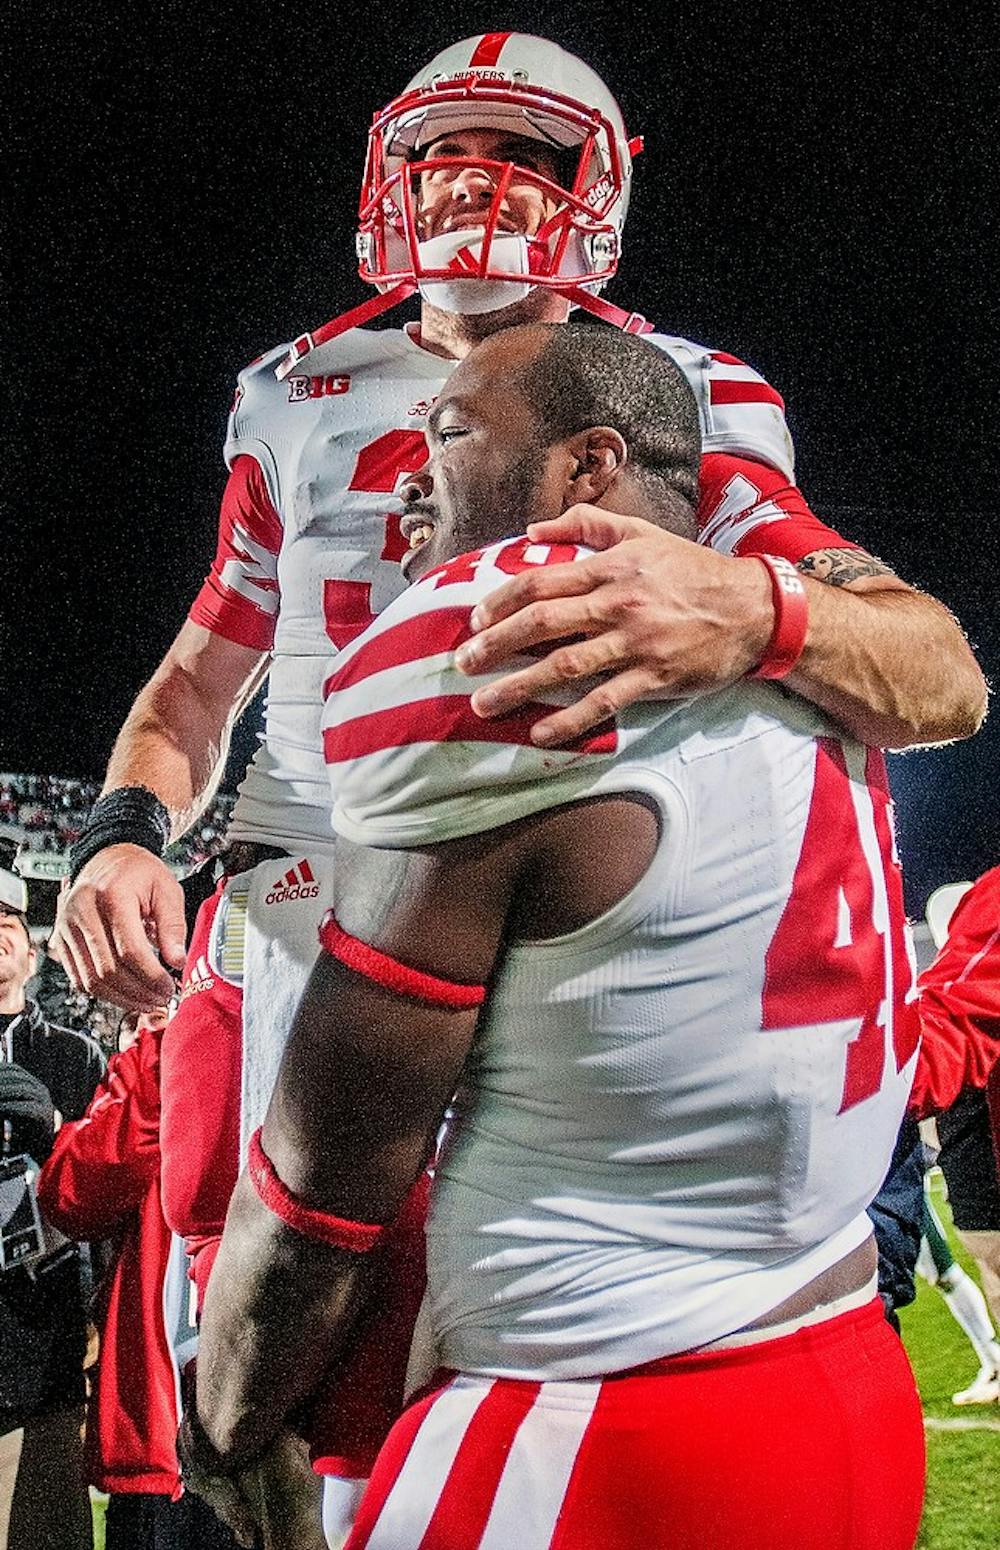 Nebraska quarterback Taylor Martinez celebrates with senior defensive end Eric Martin after the game Nov. 3, 2012, at Spartan Stadium. The Spartans had the lead going into the final minutes of the game but lost 28-24 as Nebraska was able to score with only 6 seconds remaining. Adam Toolin/The State News